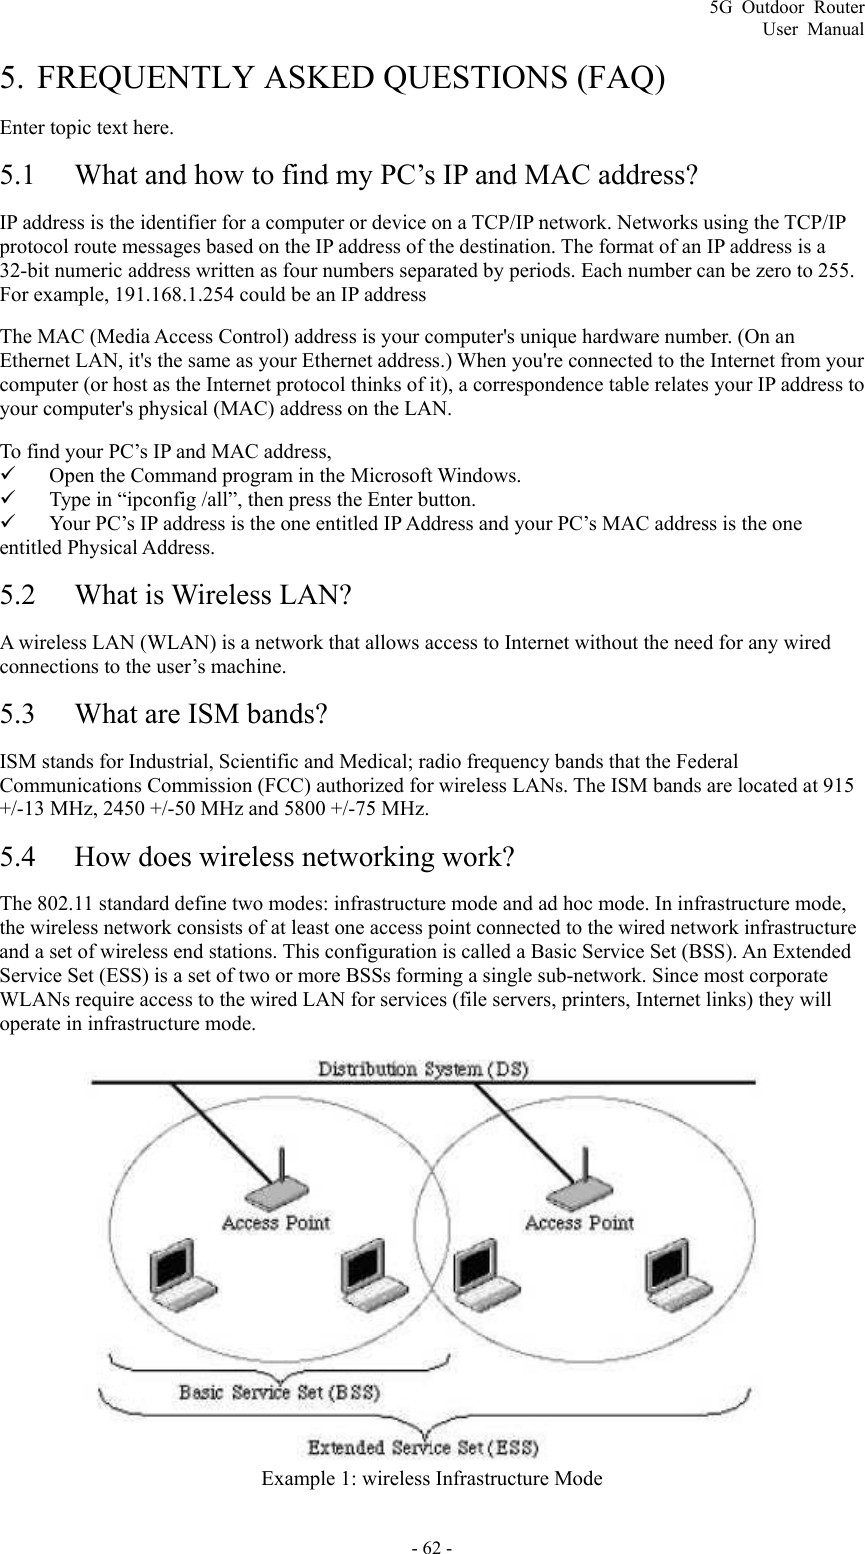 5G Outdoor Router User Manual - 62 - 5. FREQUENTLY ASKED QUESTIONS (FAQ) Enter topic text here. 5.1 What and how to find my PC’s IP and MAC address? IP address is the identifier for a computer or device on a TCP/IP network. Networks using the TCP/IP protocol route messages based on the IP address of the destination. The format of an IP address is a 32-bit numeric address written as four numbers separated by periods. Each number can be zero to 255. For example, 191.168.1.254 could be an IP address The MAC (Media Access Control) address is your computer&apos;s unique hardware number. (On an Ethernet LAN, it&apos;s the same as your Ethernet address.) When you&apos;re connected to the Internet from your computer (or host as the Internet protocol thinks of it), a correspondence table relates your IP address to your computer&apos;s physical (MAC) address on the LAN.   To find your PC’s IP and MAC address,   9 Open the Command program in the Microsoft Windows.   9 Type in “ipconfig /all”, then press the Enter button.   9 Your PC’s IP address is the one entitled IP Address and your PC’s MAC address is the one entitled Physical Address. 5.2 What is Wireless LAN? A wireless LAN (WLAN) is a network that allows access to Internet without the need for any wired connections to the user’s machine.   5.3 What are ISM bands? ISM stands for Industrial, Scientific and Medical; radio frequency bands that the Federal Communications Commission (FCC) authorized for wireless LANs. The ISM bands are located at 915 +/-13 MHz, 2450 +/-50 MHz and 5800 +/-75 MHz. 5.4 How does wireless networking work? The 802.11 standard define two modes: infrastructure mode and ad hoc mode. In infrastructure mode, the wireless network consists of at least one access point connected to the wired network infrastructure and a set of wireless end stations. This configuration is called a Basic Service Set (BSS). An Extended Service Set (ESS) is a set of two or more BSSs forming a single sub-network. Since most corporate WLANs require access to the wired LAN for services (file servers, printers, Internet links) they will operate in infrastructure mode.   Example 1: wireless Infrastructure Mode 